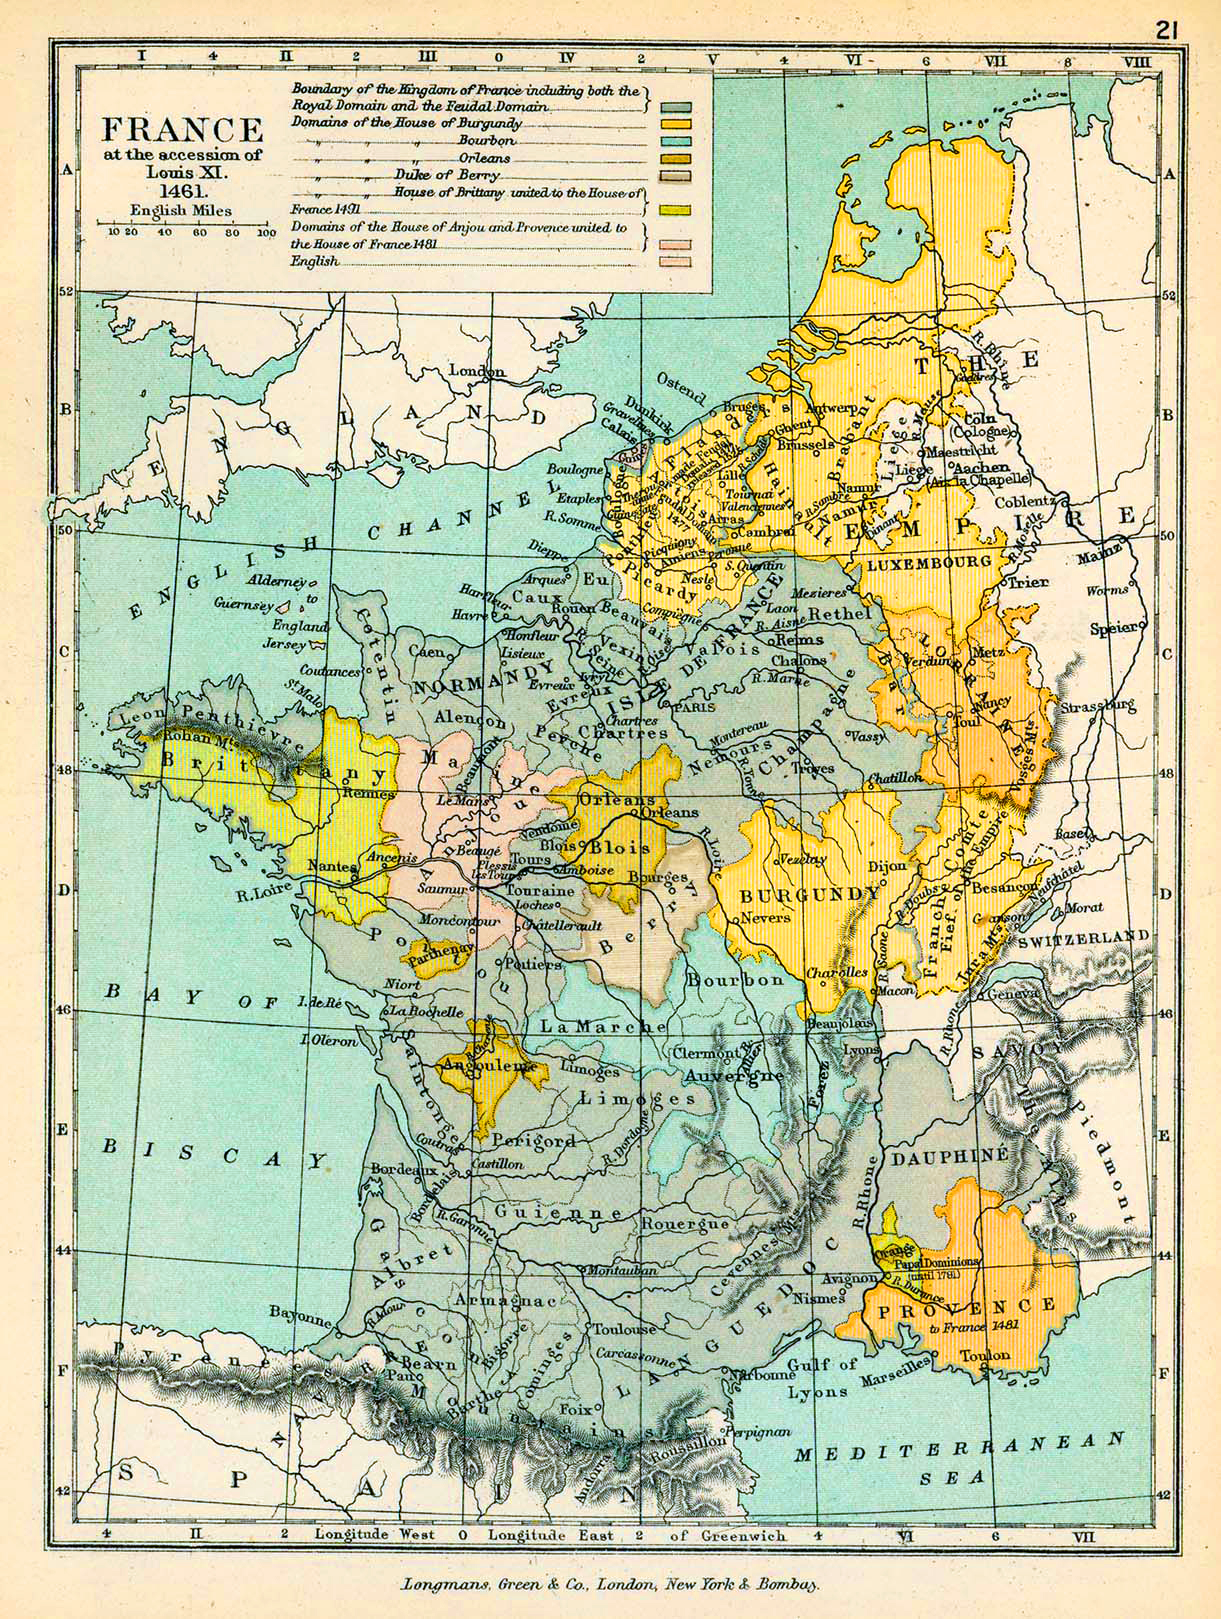 Map of France at the accession of Louis XI, 1461